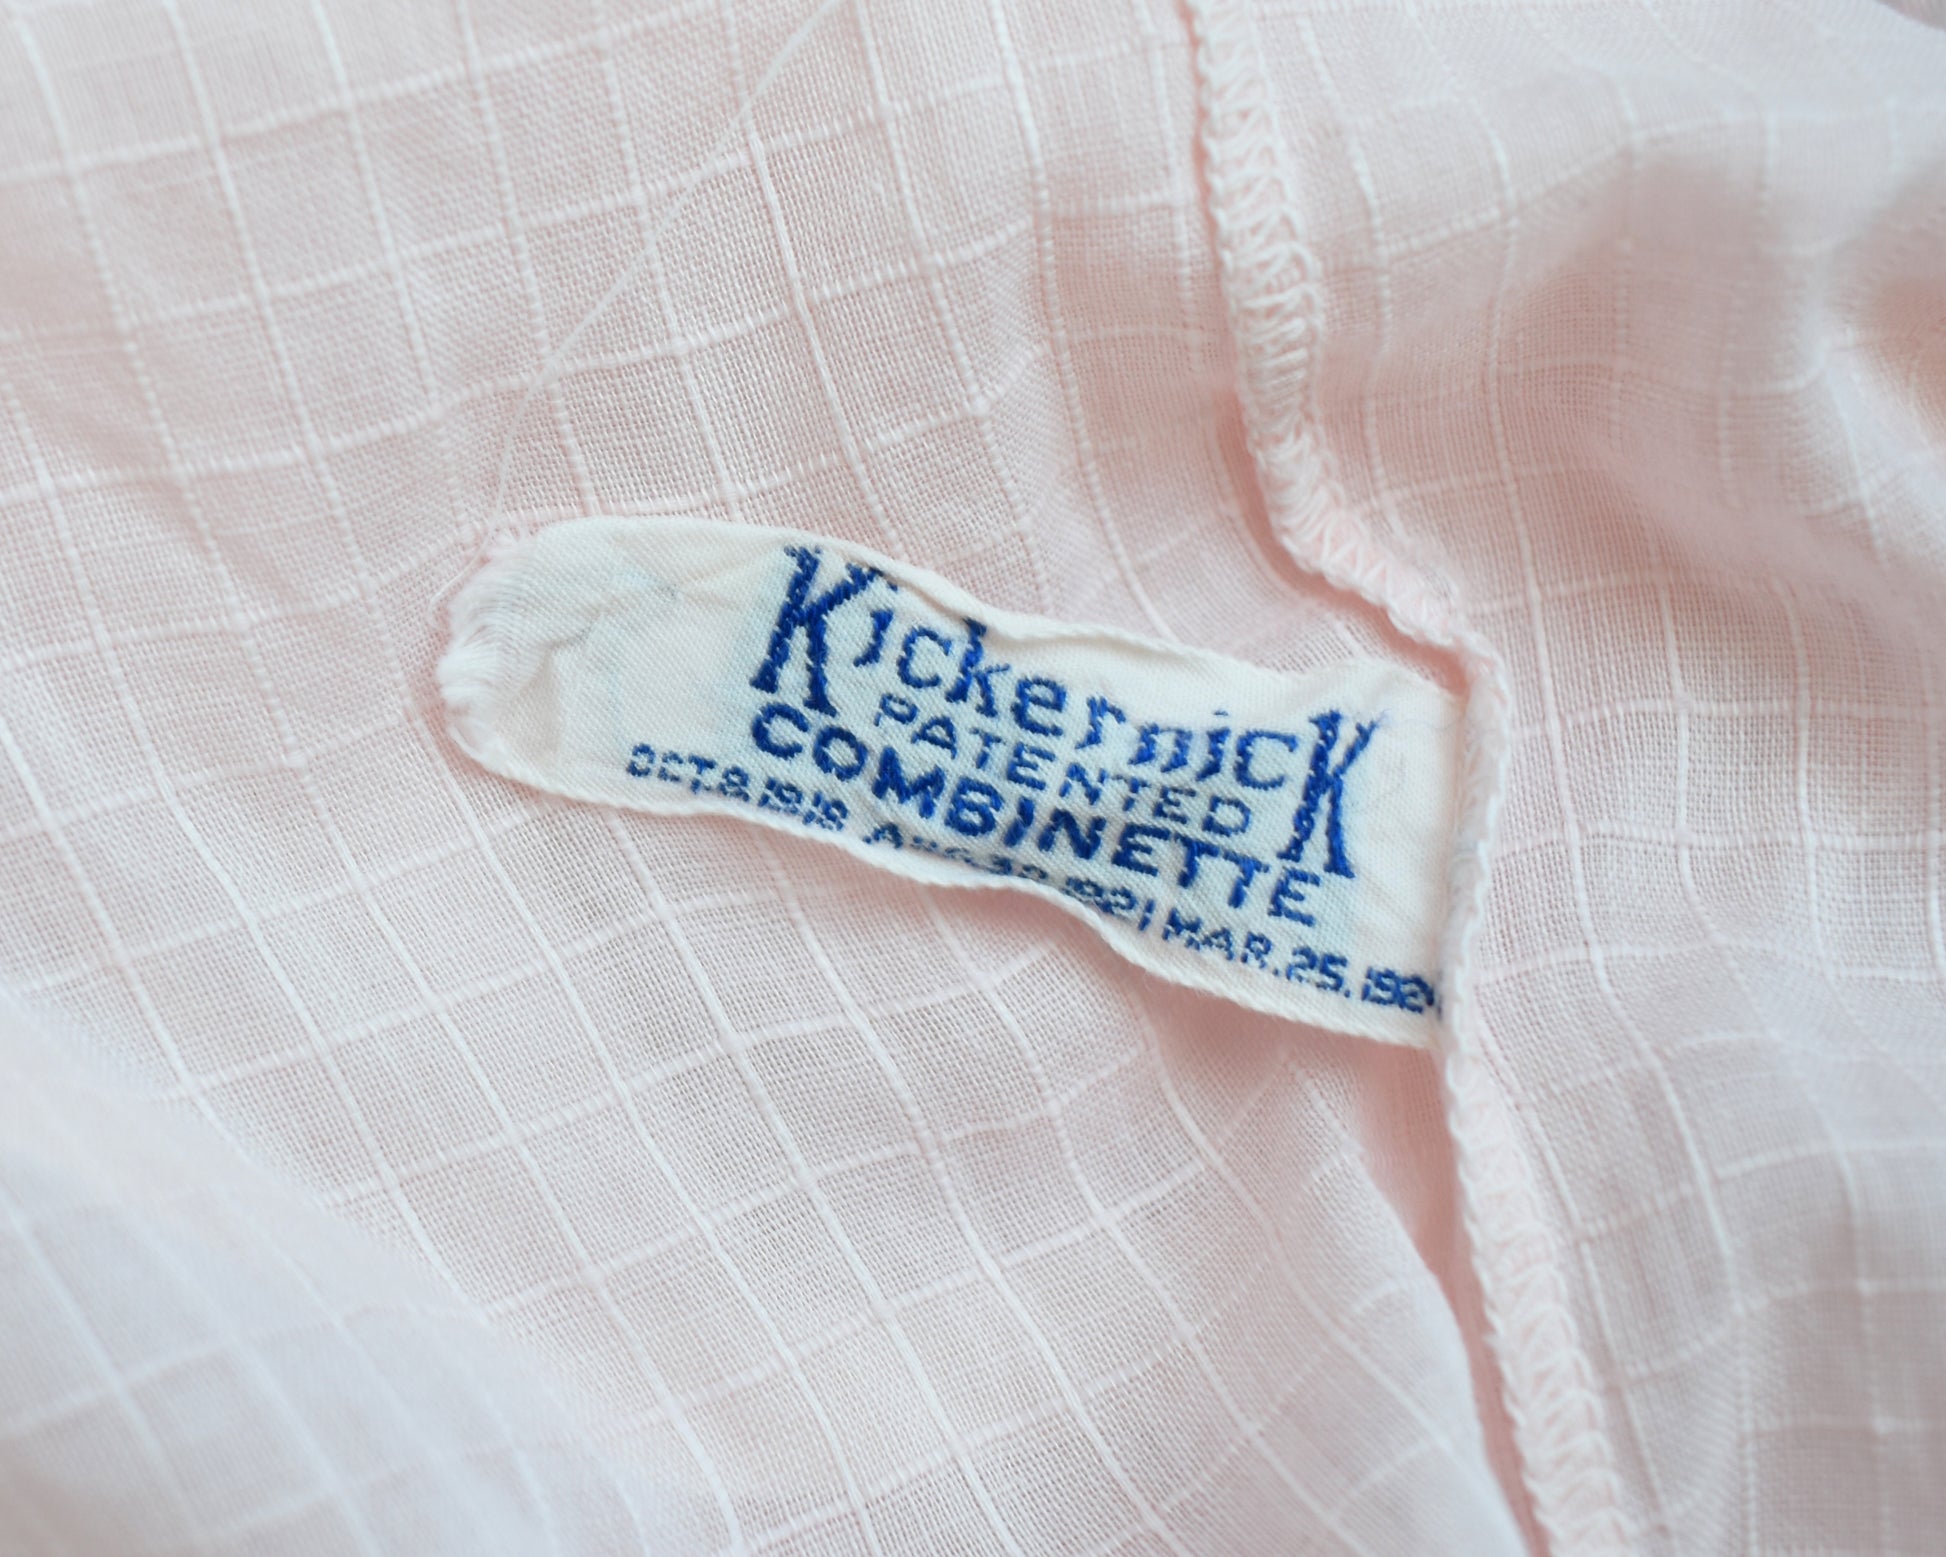 Close up of the tag that says Kickernick Patented Combinette Oct 8 1918 Aug 30 1921 Mar 25 1924